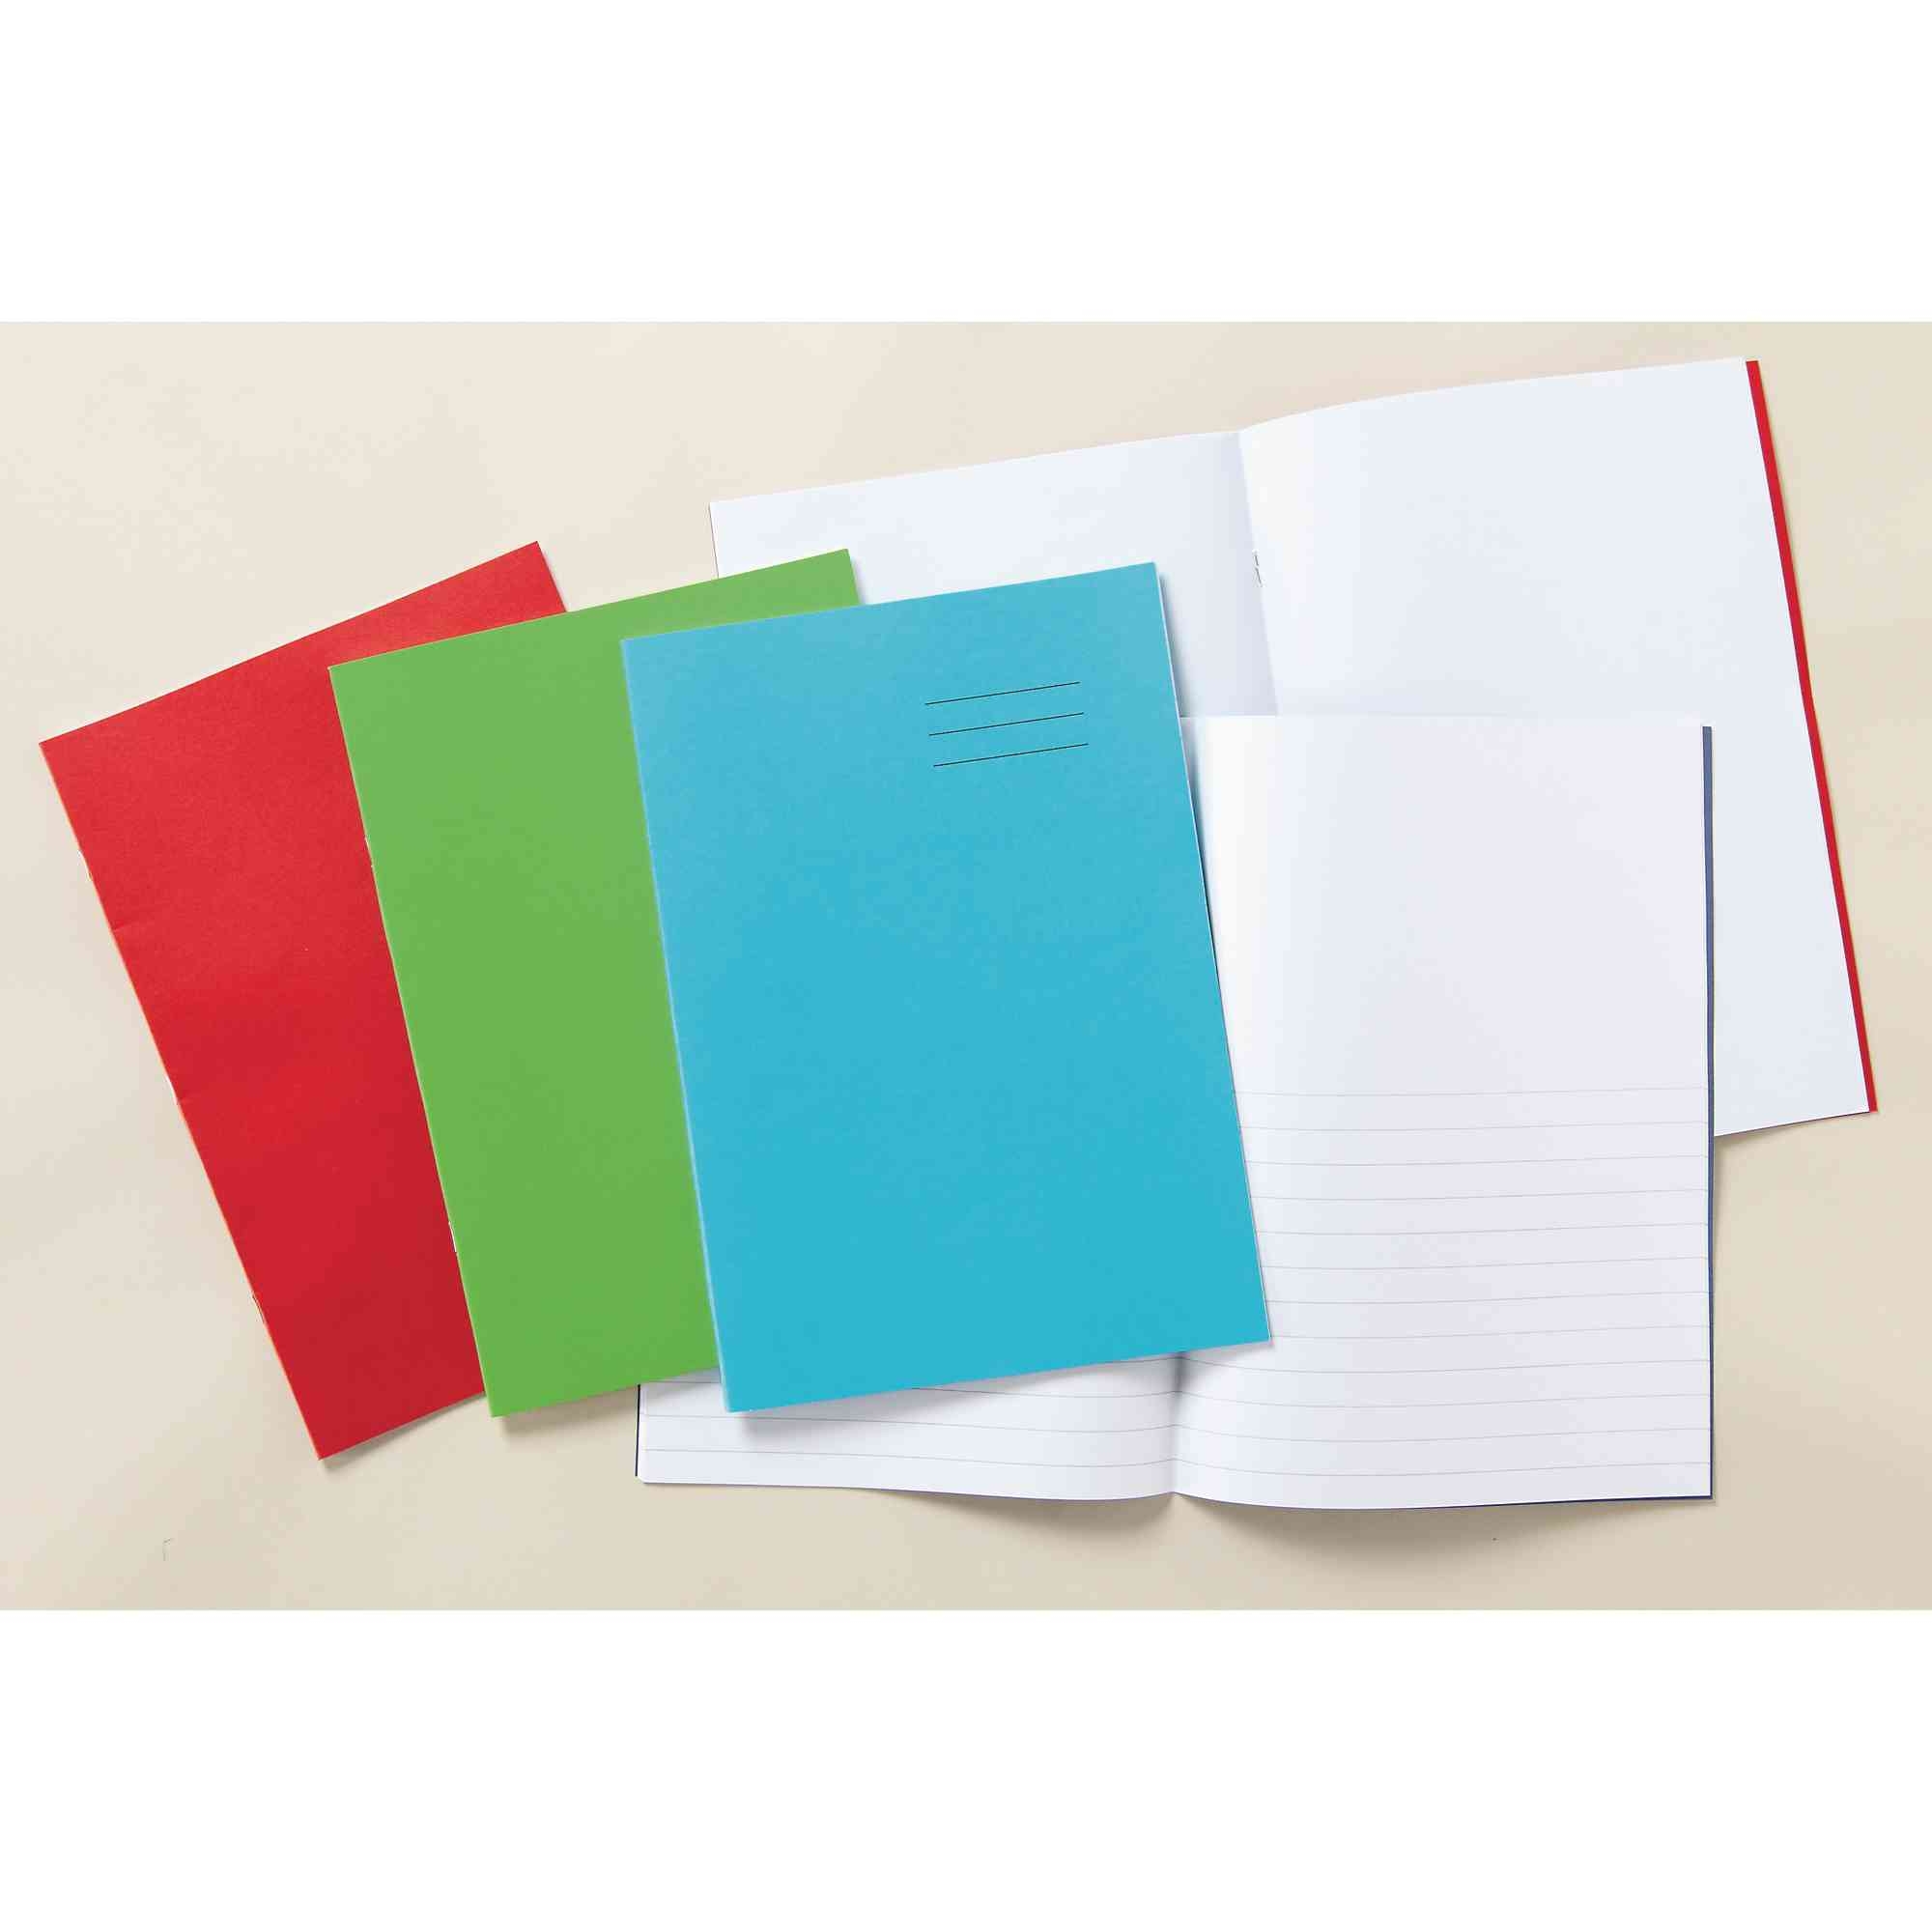 Vivid Blue 8x6.5" Exercise Book 32-Page, 10mm Squared - Pack of 100